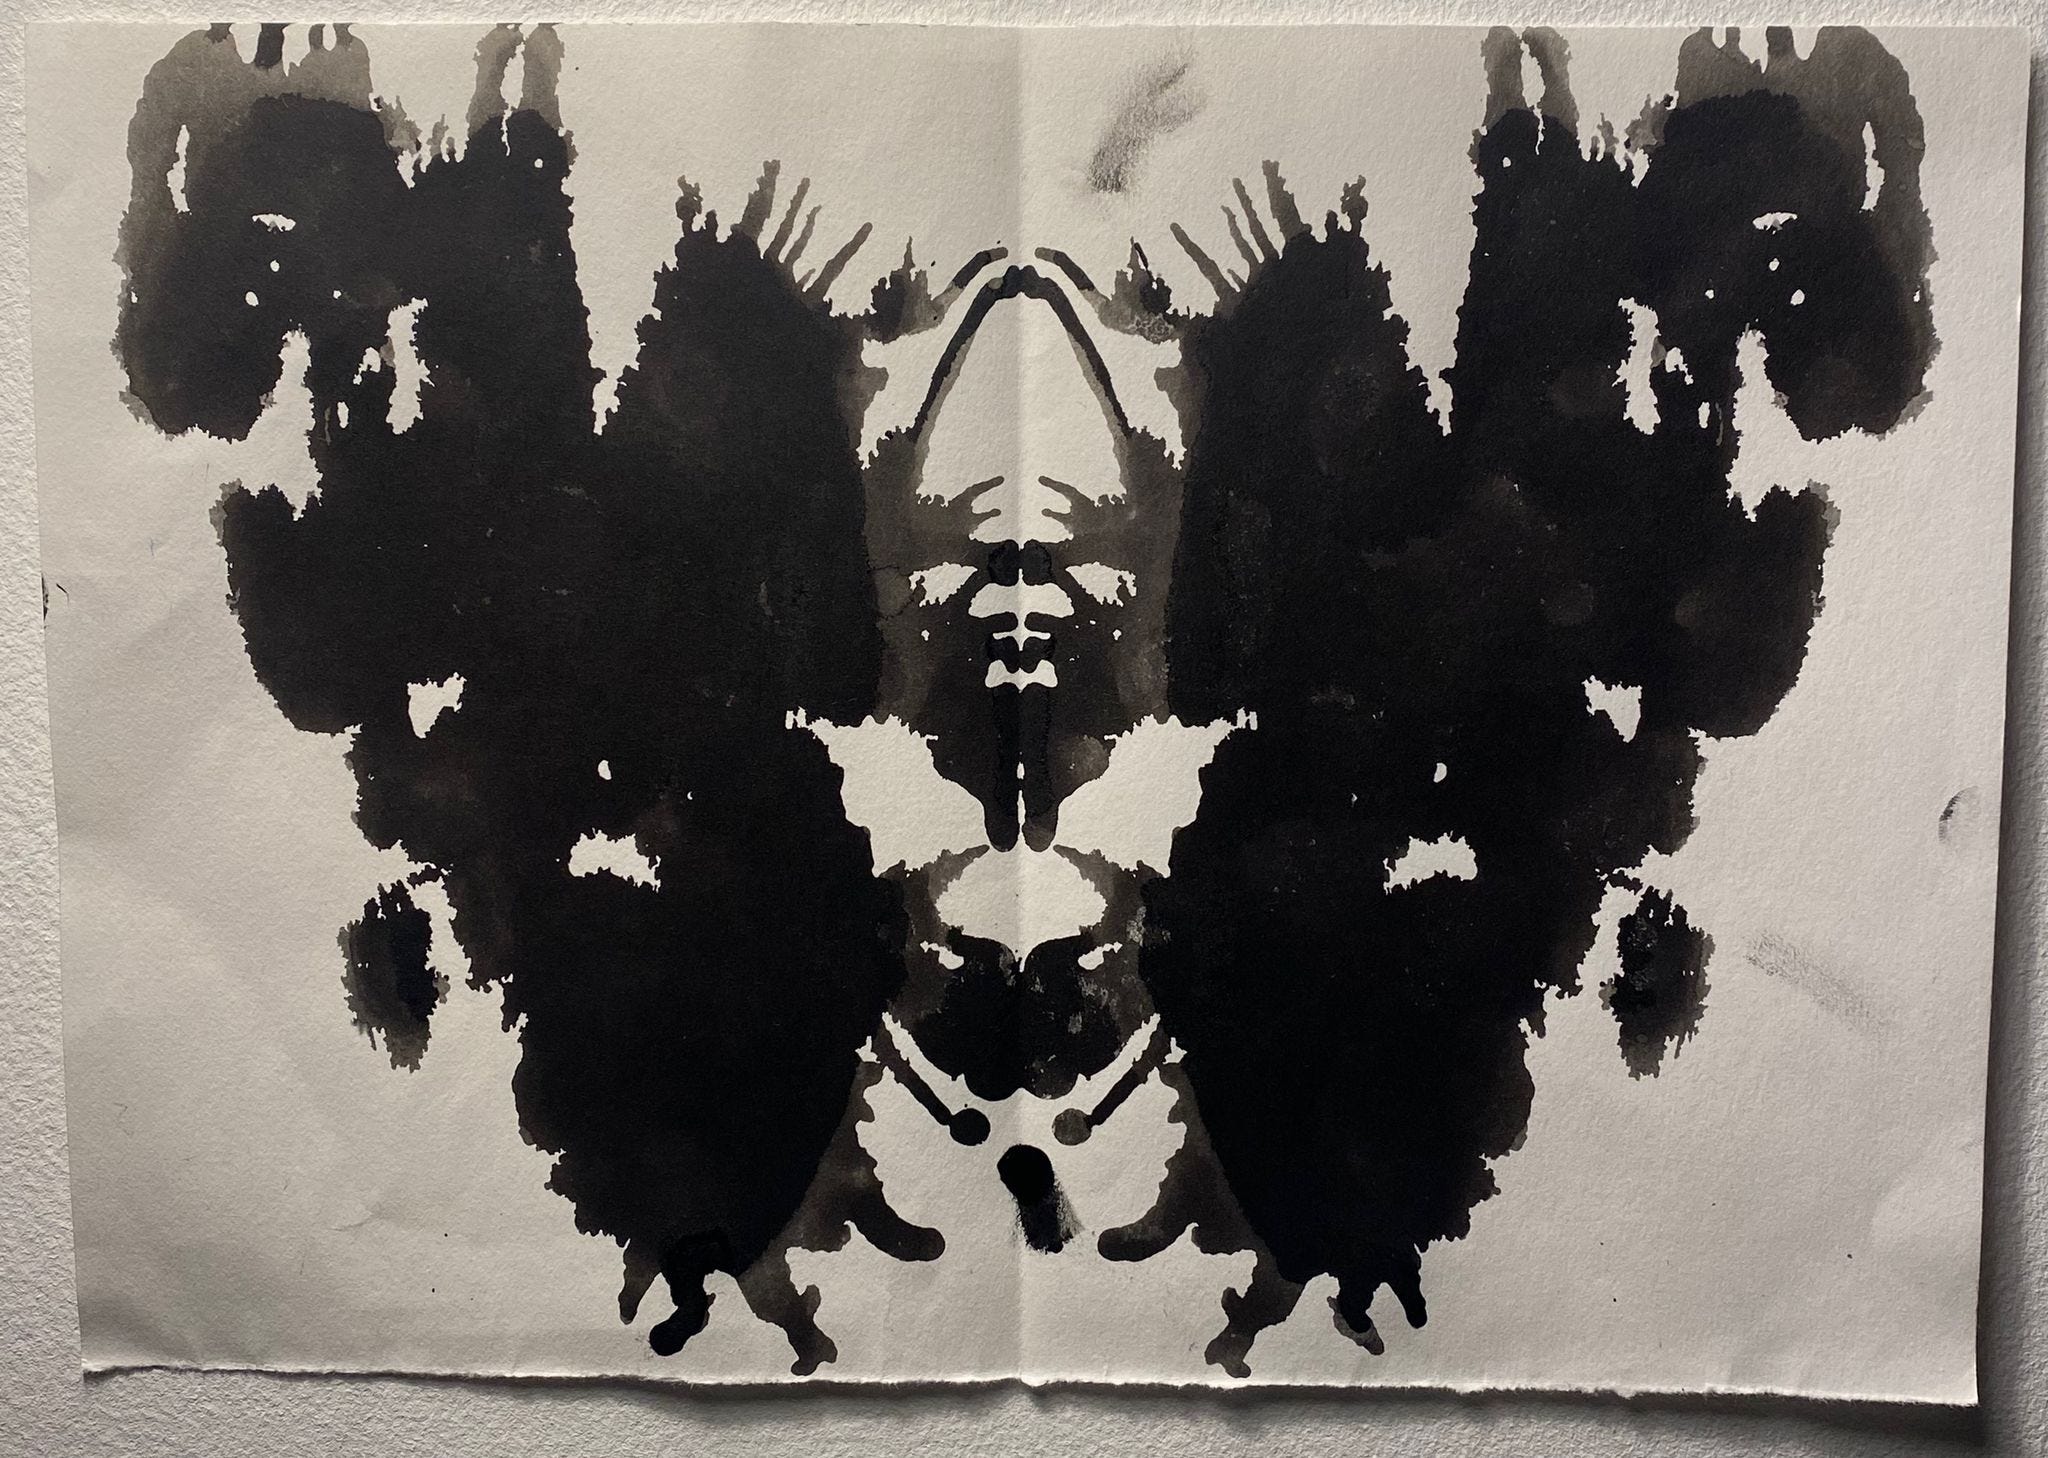 A piece of paper showing a Rorschach style ink blot, printed in black. The print brings together the bear and the pelvis of the previous images. The bear’s face in the centre, and the hip bones splaying out from it.